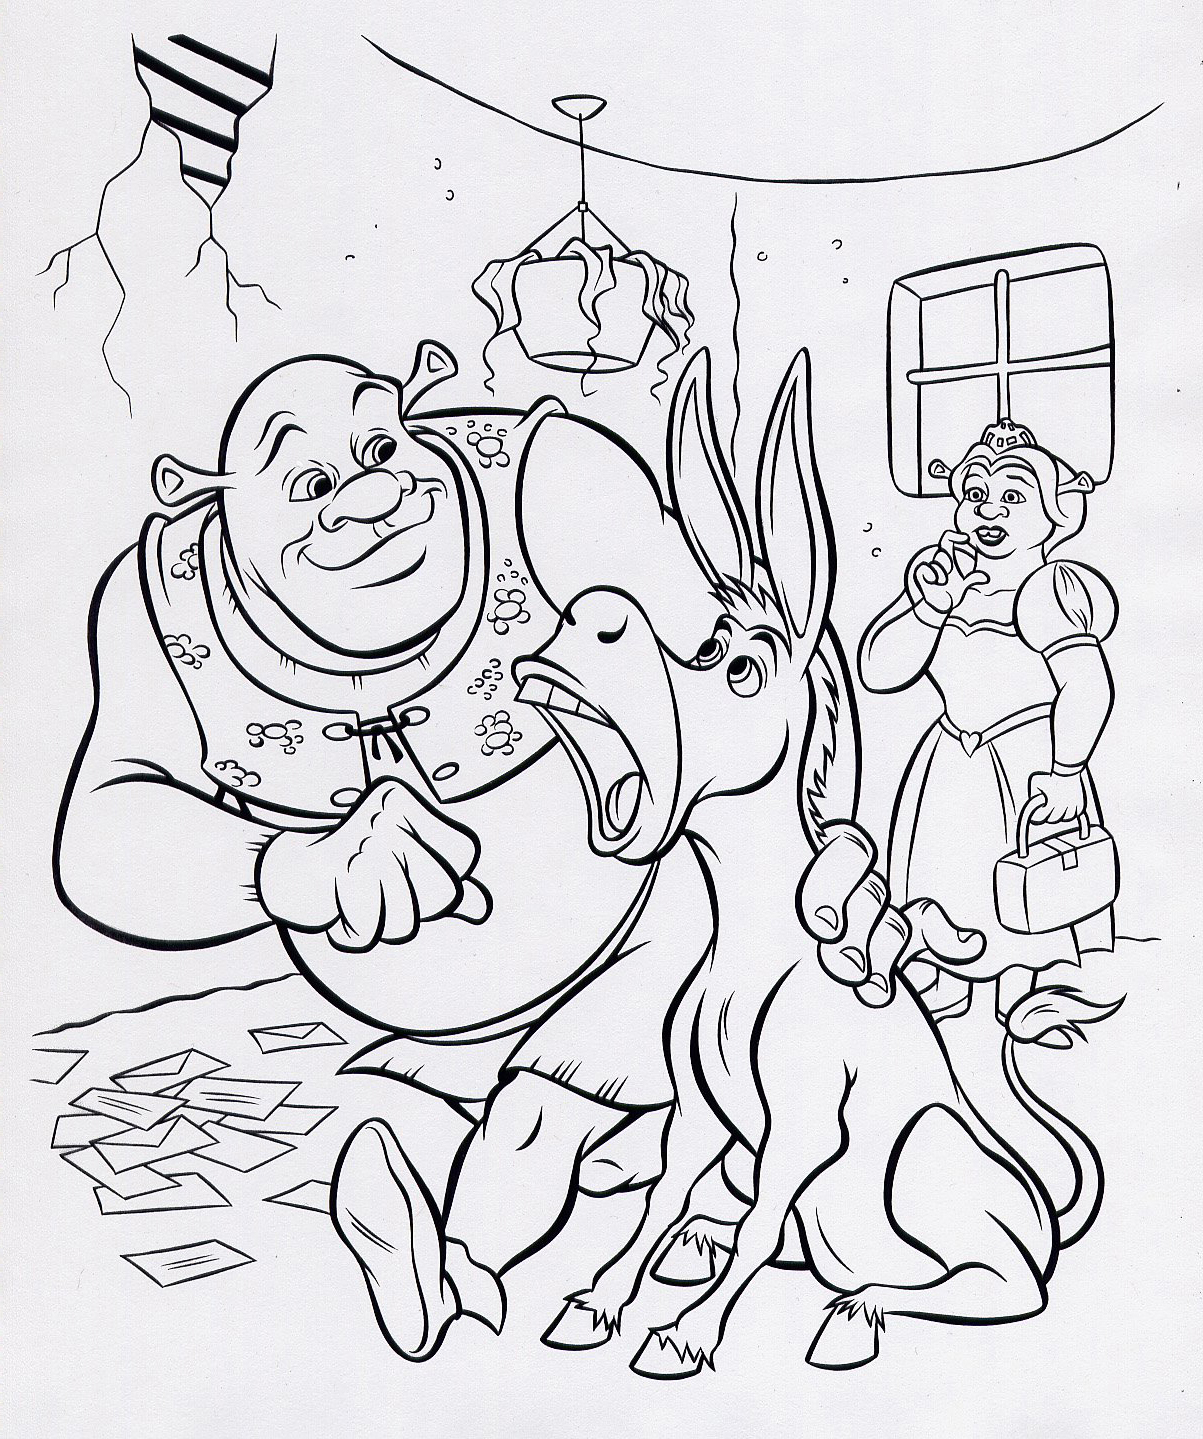 shrek-coloring-pages-disney-coloring-pages